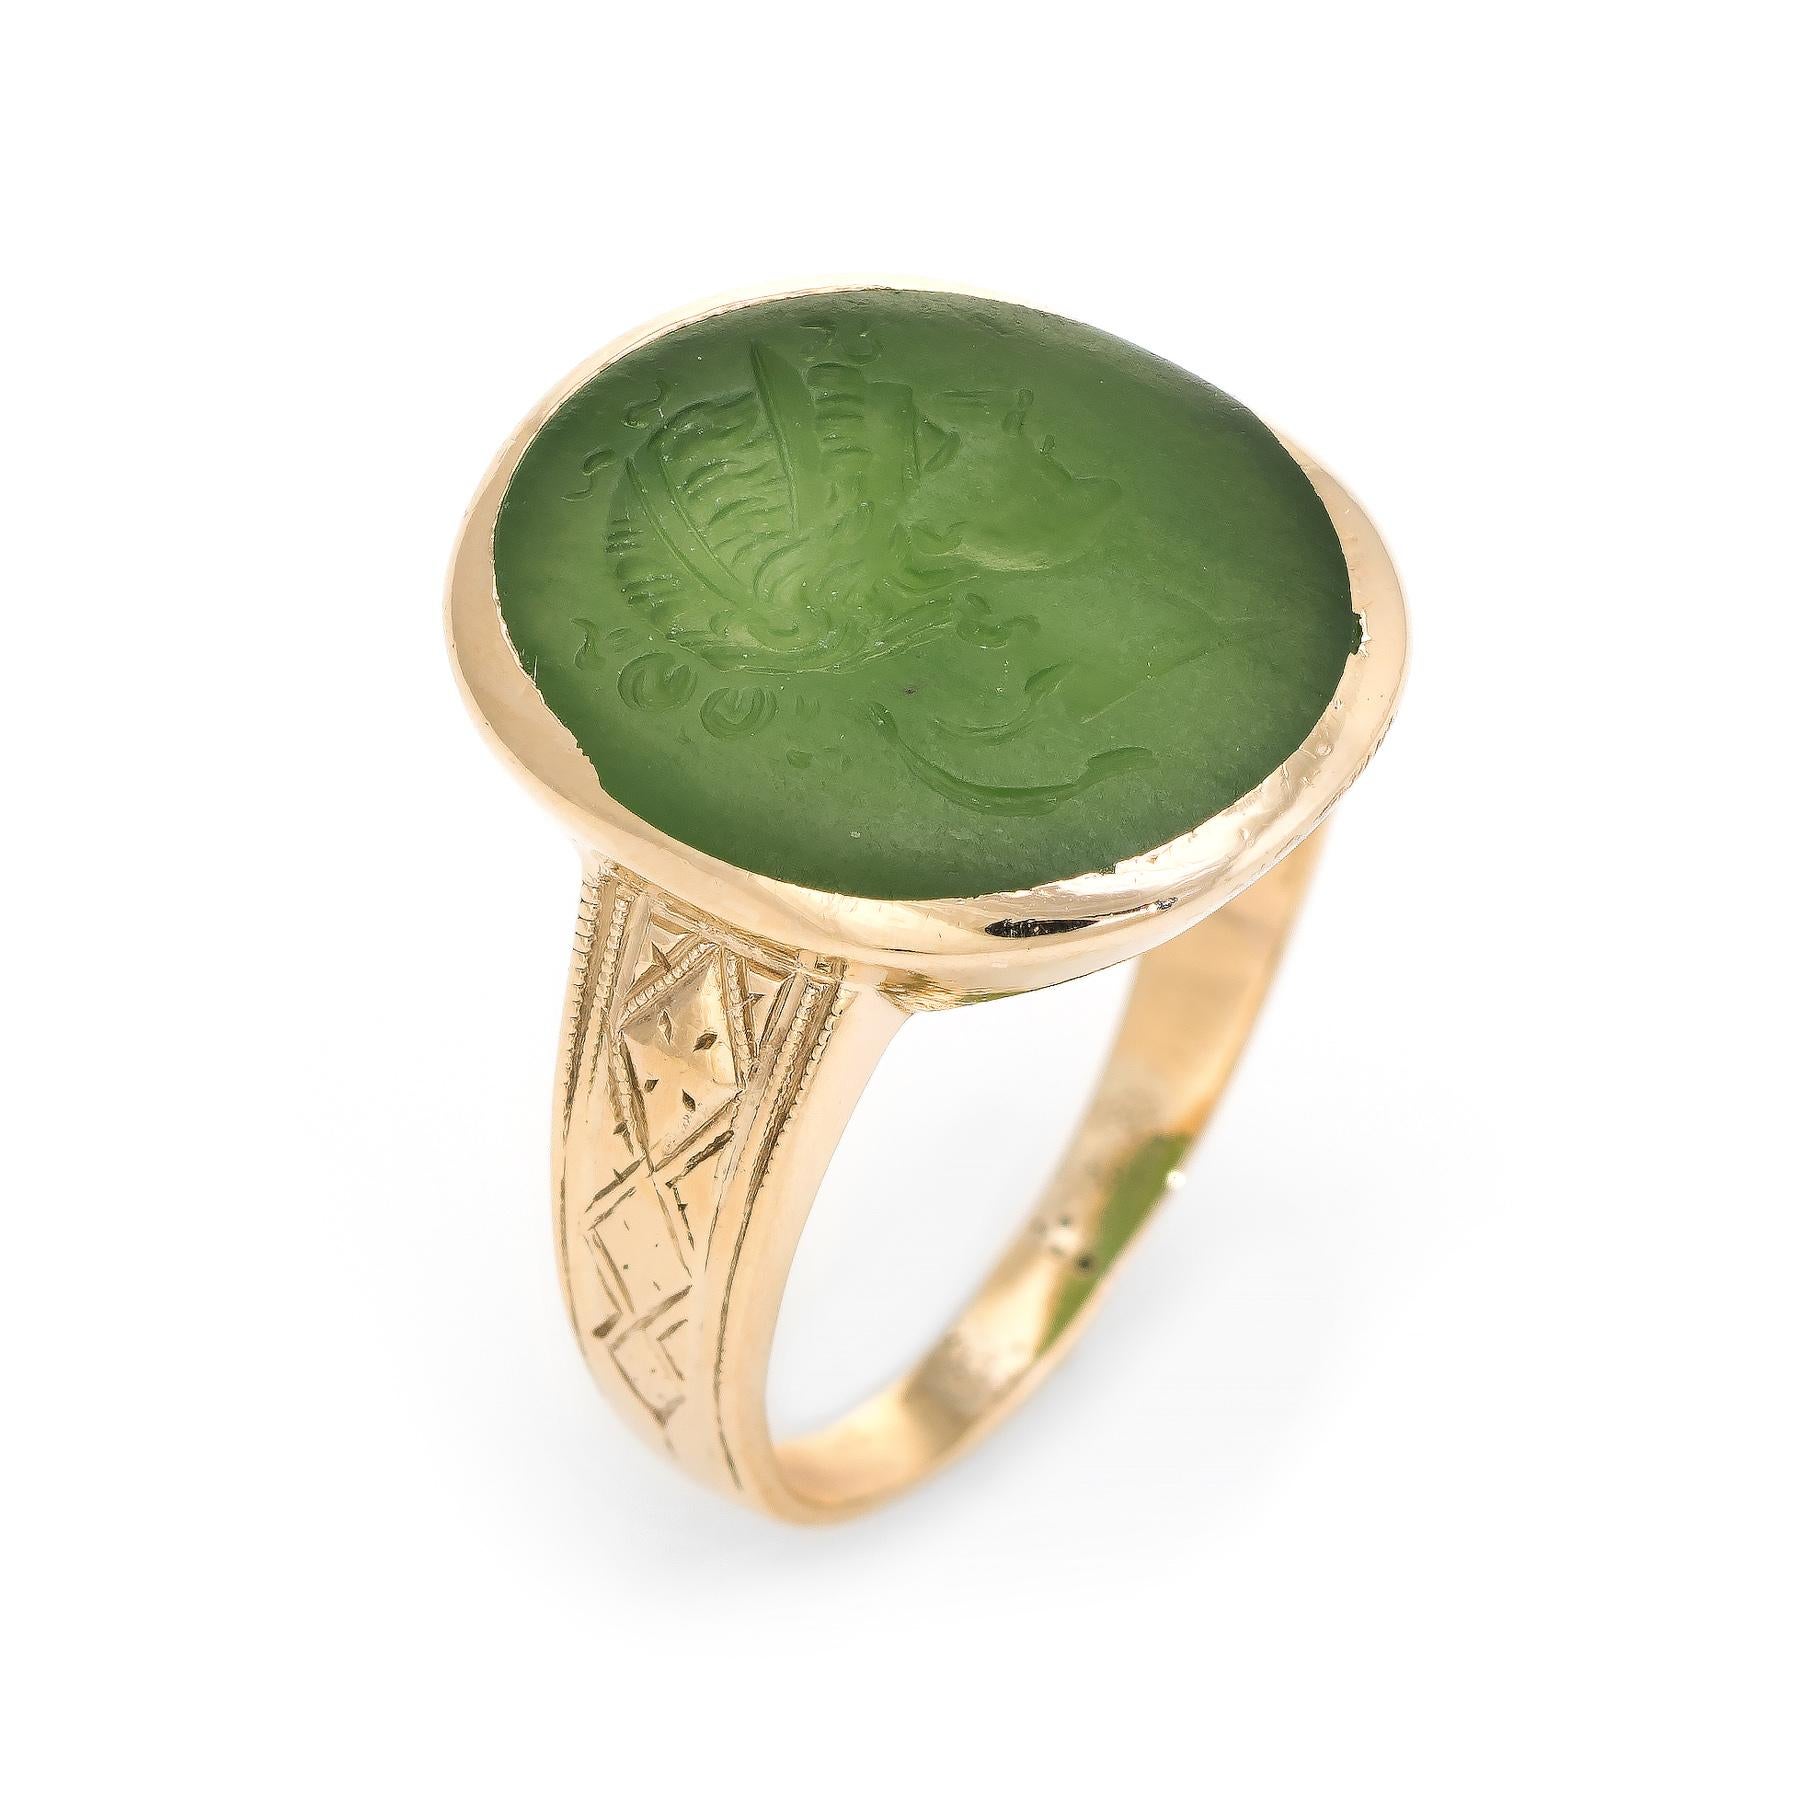 Finely detailed antique Victorian intaglio ring (circa 1880s to 1900s), crafted in 10 karat yellow gold. 

Green agate is carved with a portrait of a soldier measuring 15mm x 13mm. The agate is in excellent condition and free of cracks or chips